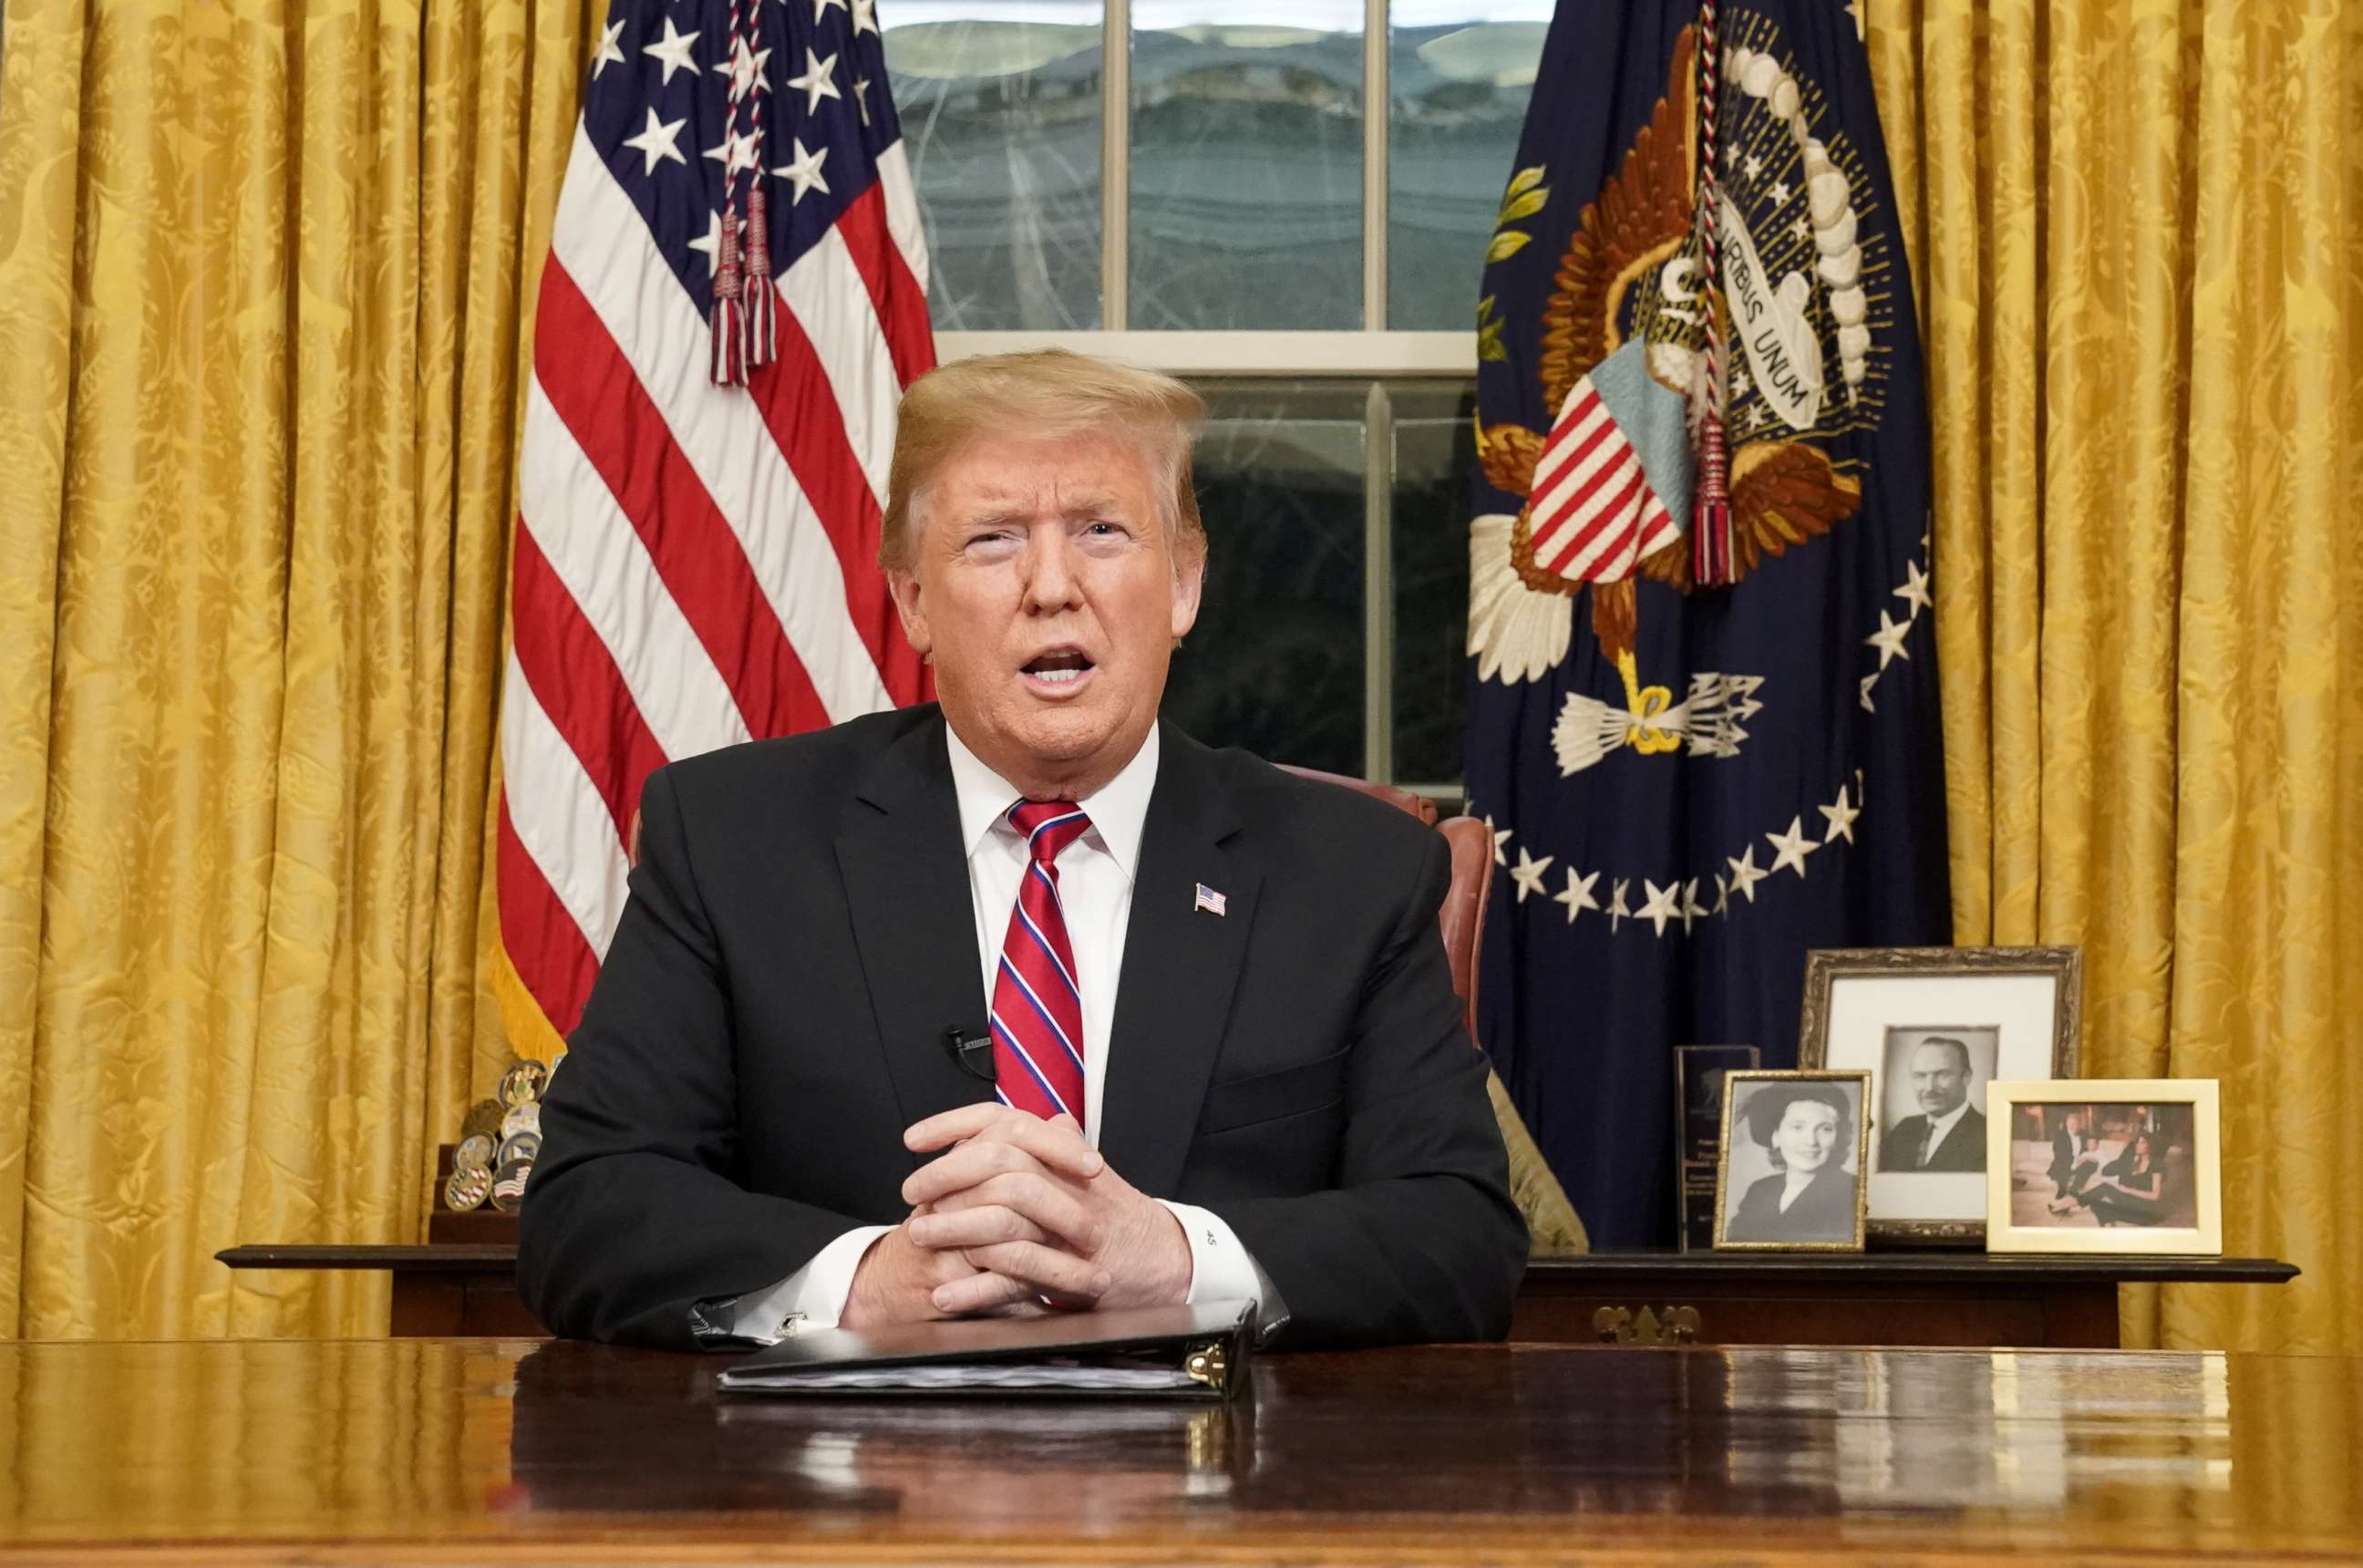 PHOTO: President Donald Trump delivers a televised address to the nation from his desk in the Oval Office about immigration and the southern U.S. border at the White House in Washington, Jan. 8, 2019.